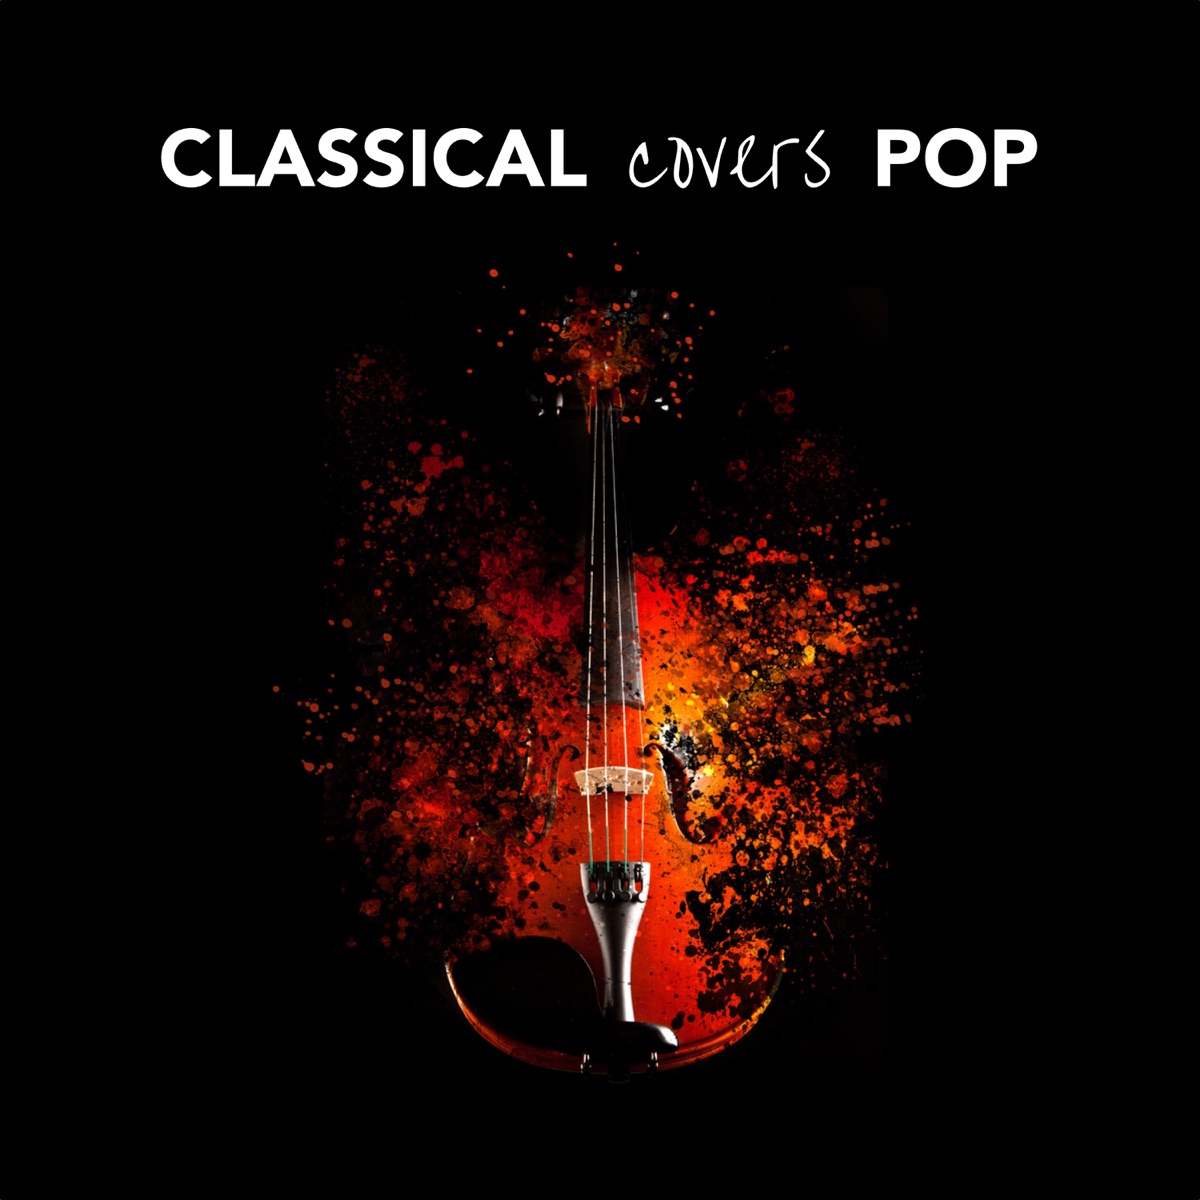 Classical Covers Pop by Various Artists on Apple Music